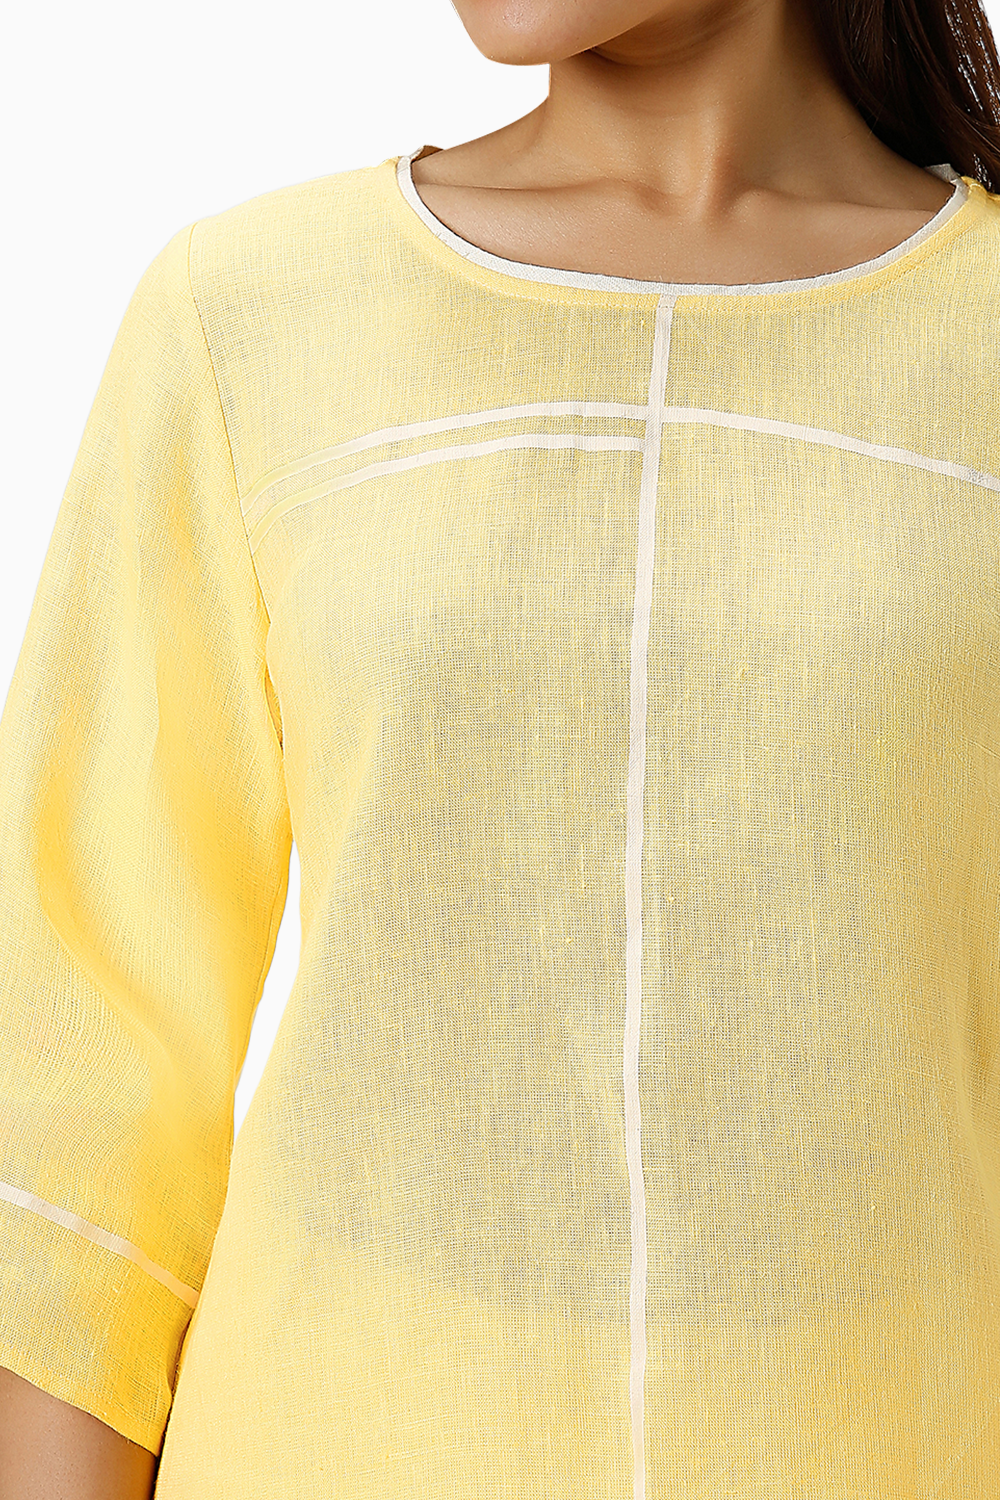 Crossroad Yellow Top and Pant